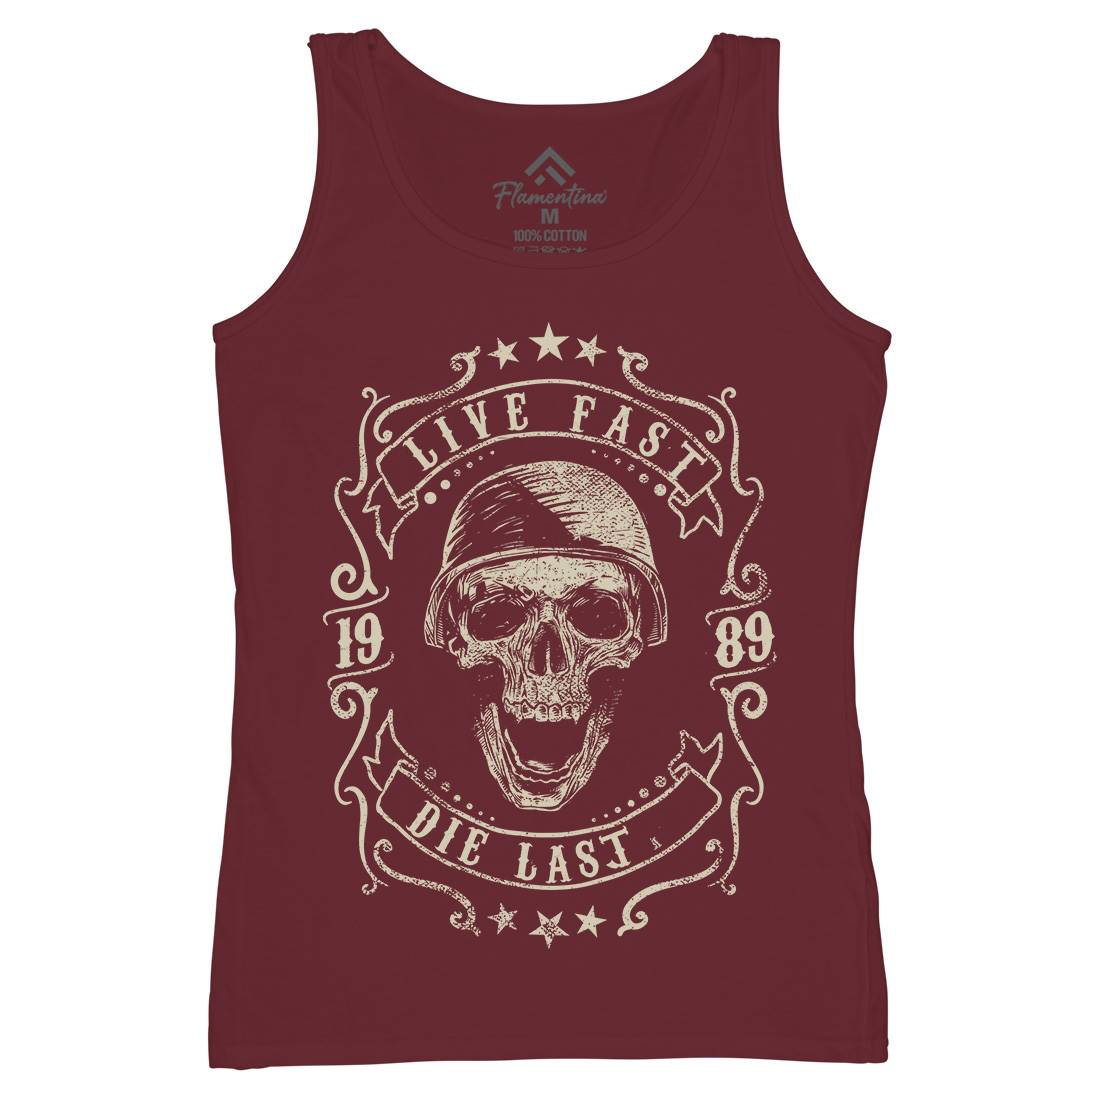 Live Fast Womens Organic Tank Top Vest Motorcycles C961